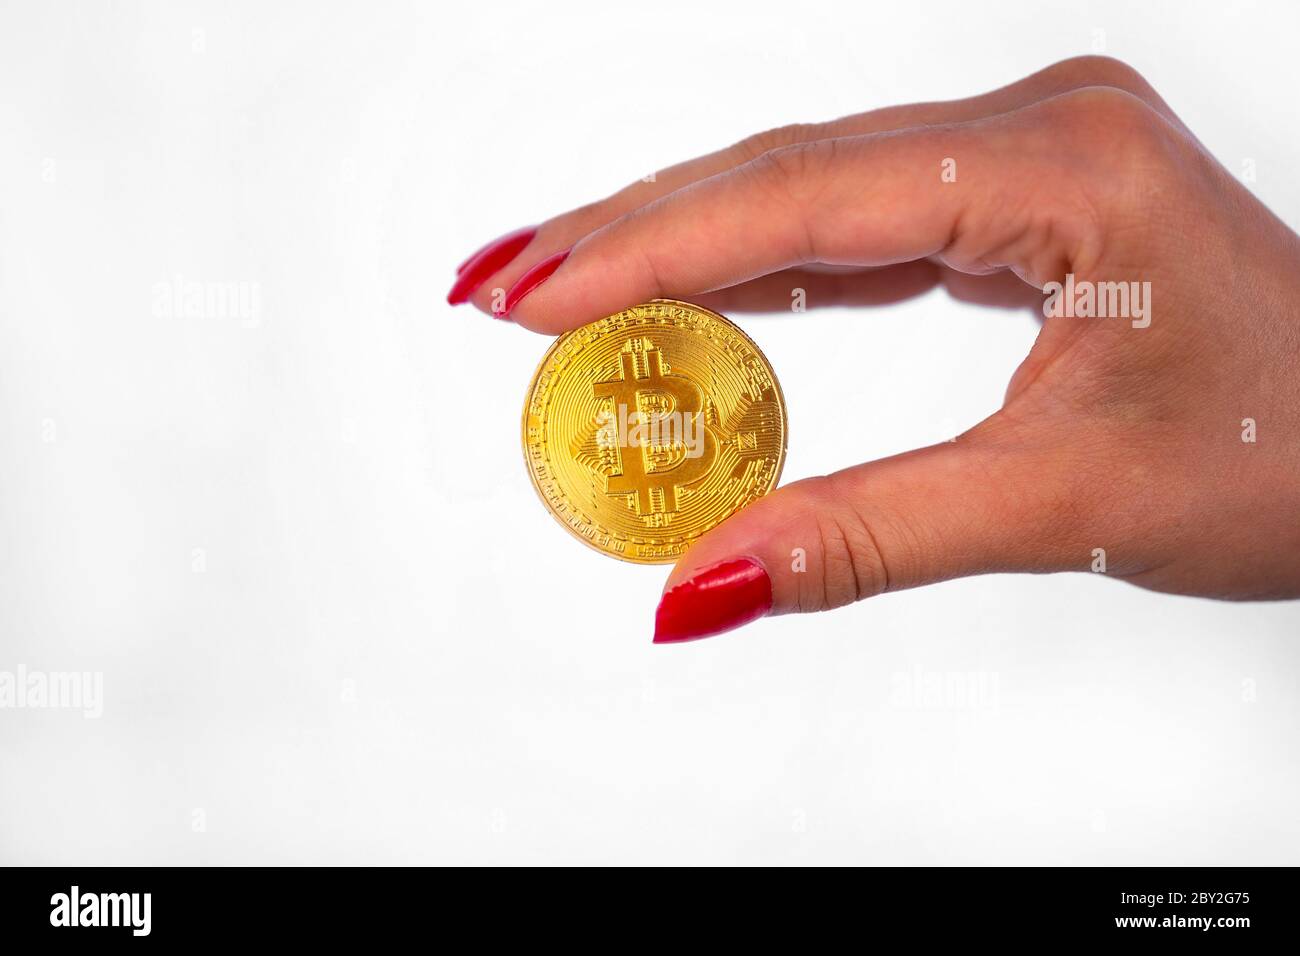 Virtual cryptocurrency money Bitcoin golden coin in the right hand of a woman with red nail polish. The future of money. Isolated on a white backgroun Stock Photo